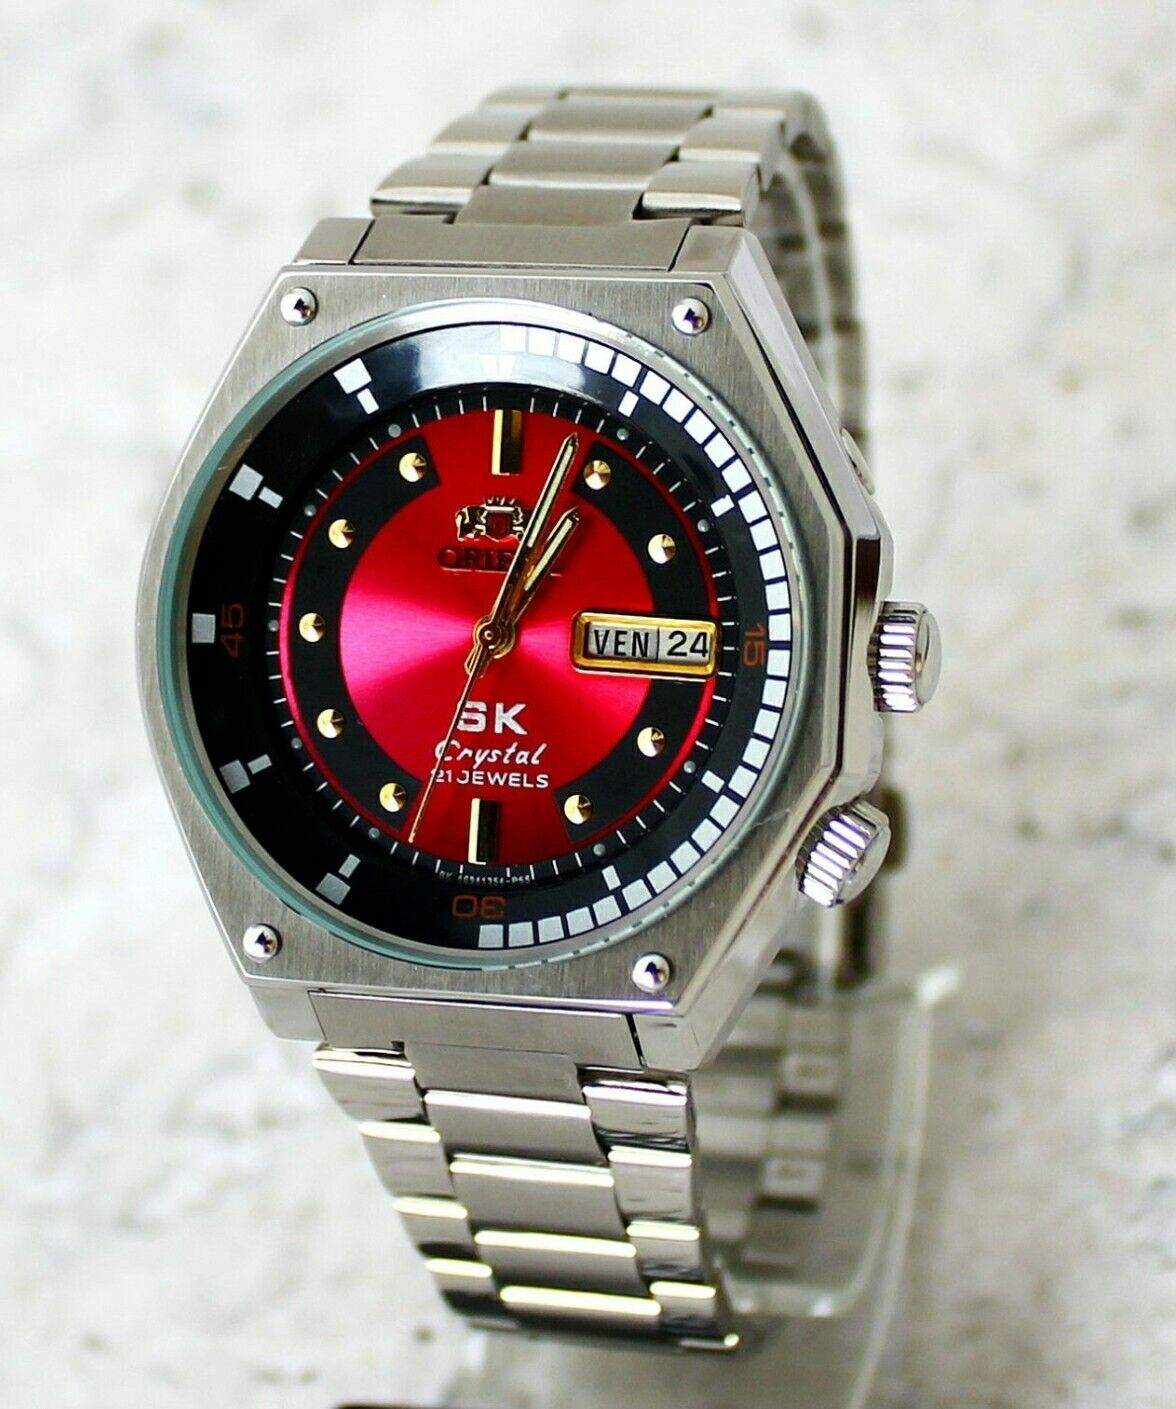 💥NEW💥 Watch ORIENT Sea King SK AUTOMATIC King Diver KD ORIGINAL JAPAN RED Dial